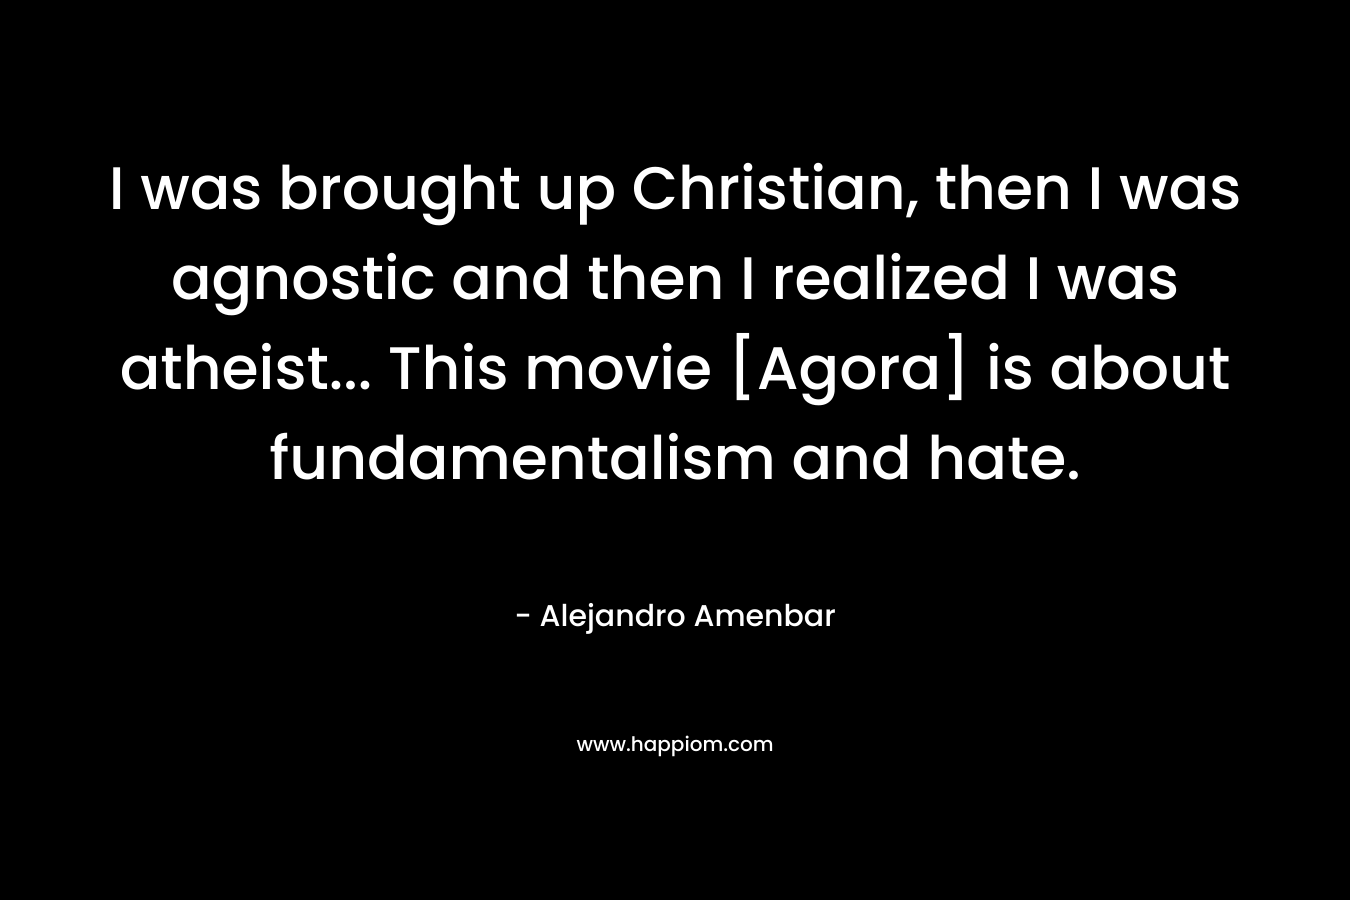 I was brought up Christian, then I was agnostic and then I realized I was atheist… This movie [Agora] is about fundamentalism and hate. – Alejandro Amenbar